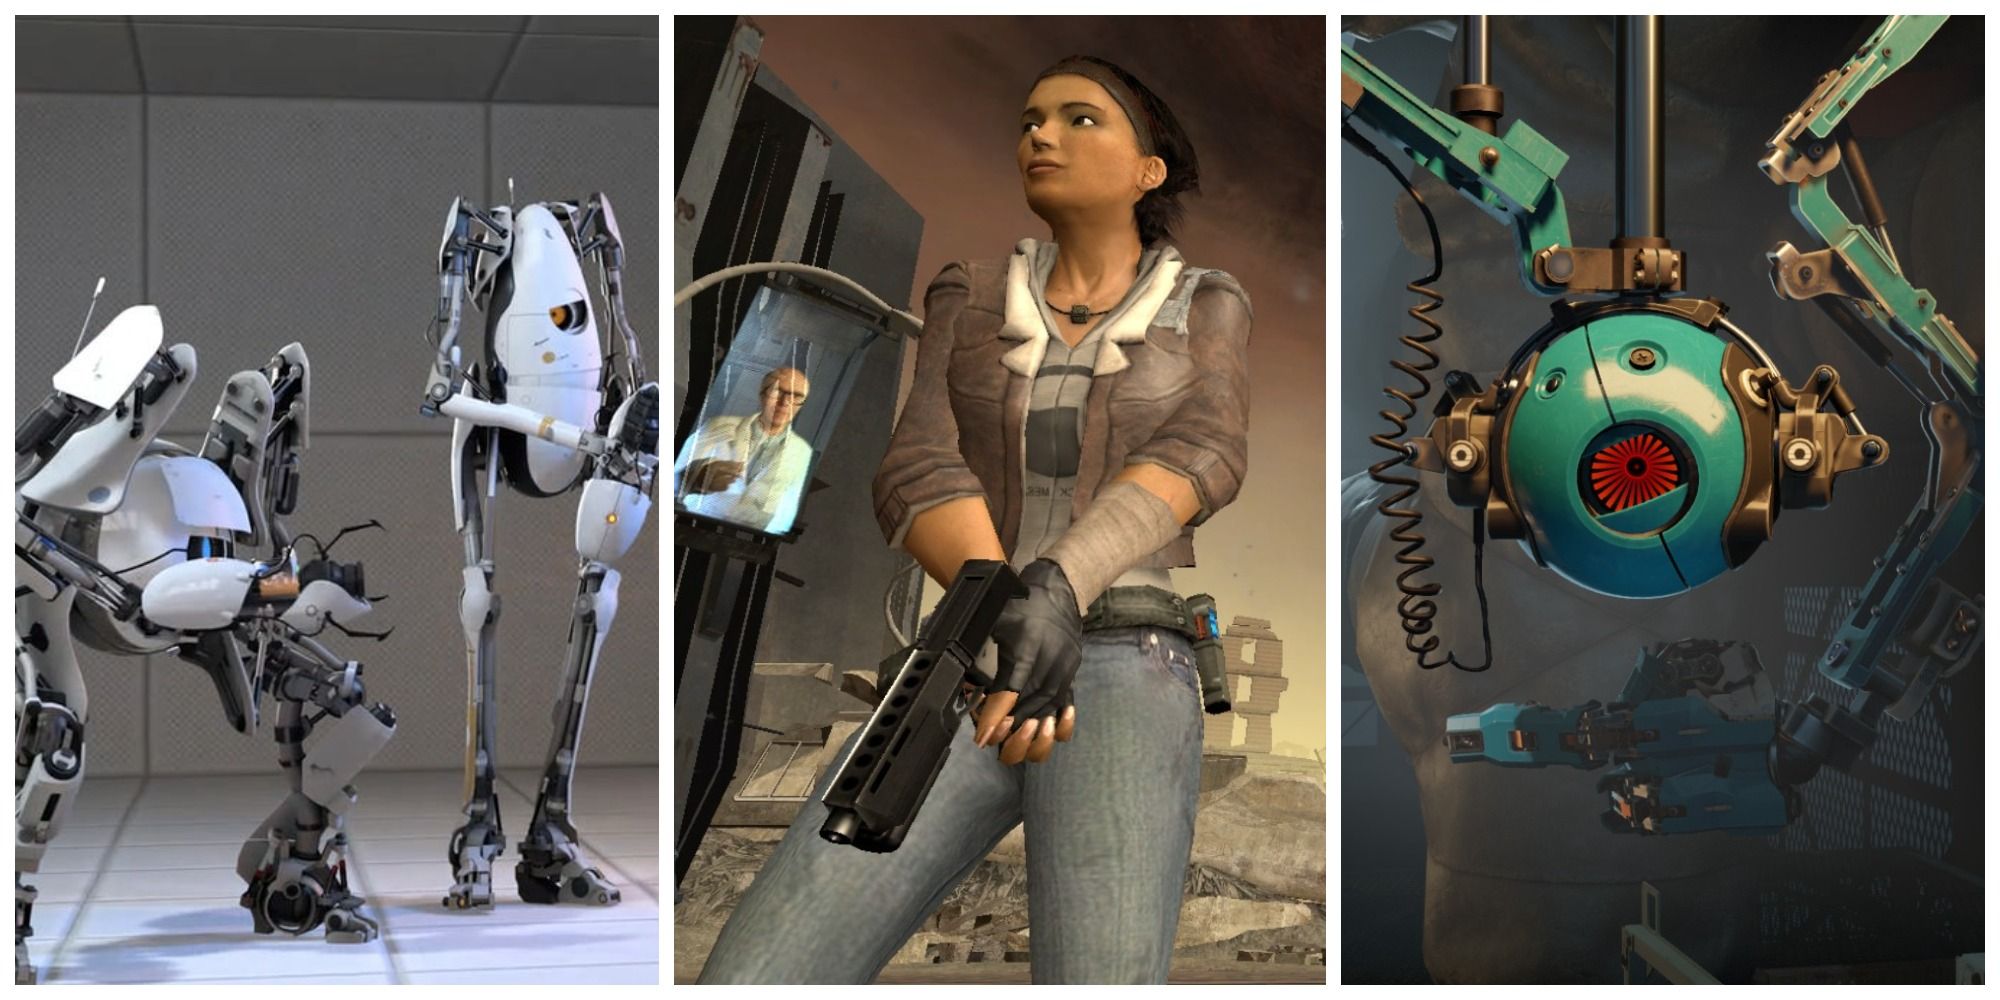 Feature Image, From left to right; Peabody and Atlas from Portal 2, Alyx from Half-Life 2, Grady from Aperture Desk Job